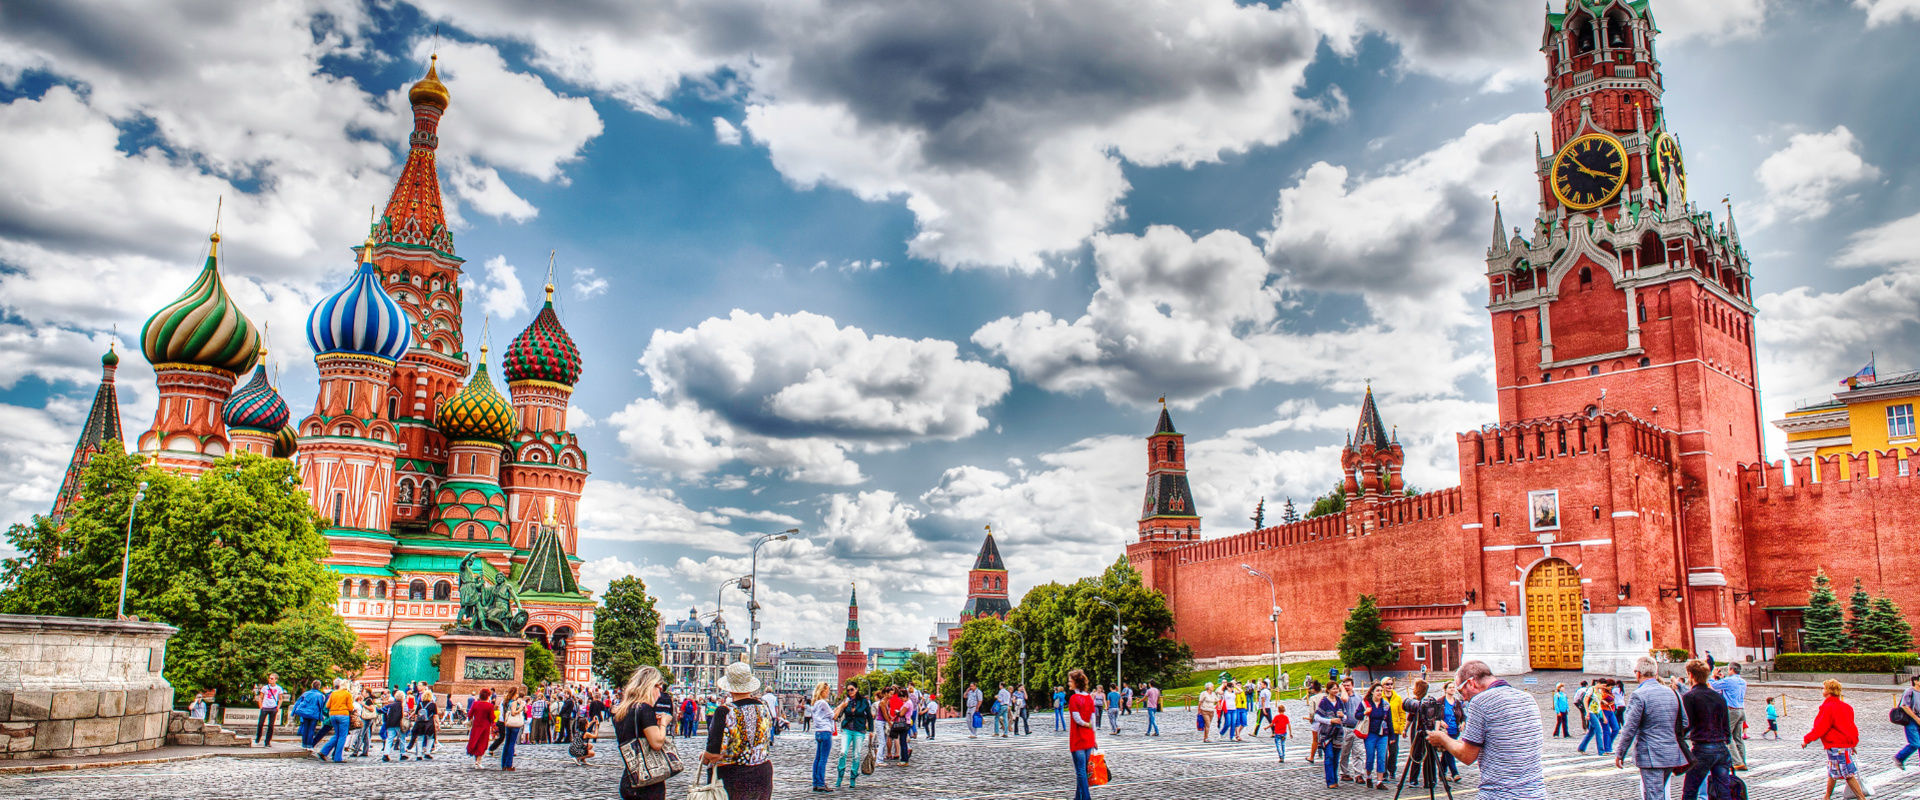 wide_fullhd_Red_square_Moscow_cityscape__8309148721_.jpg